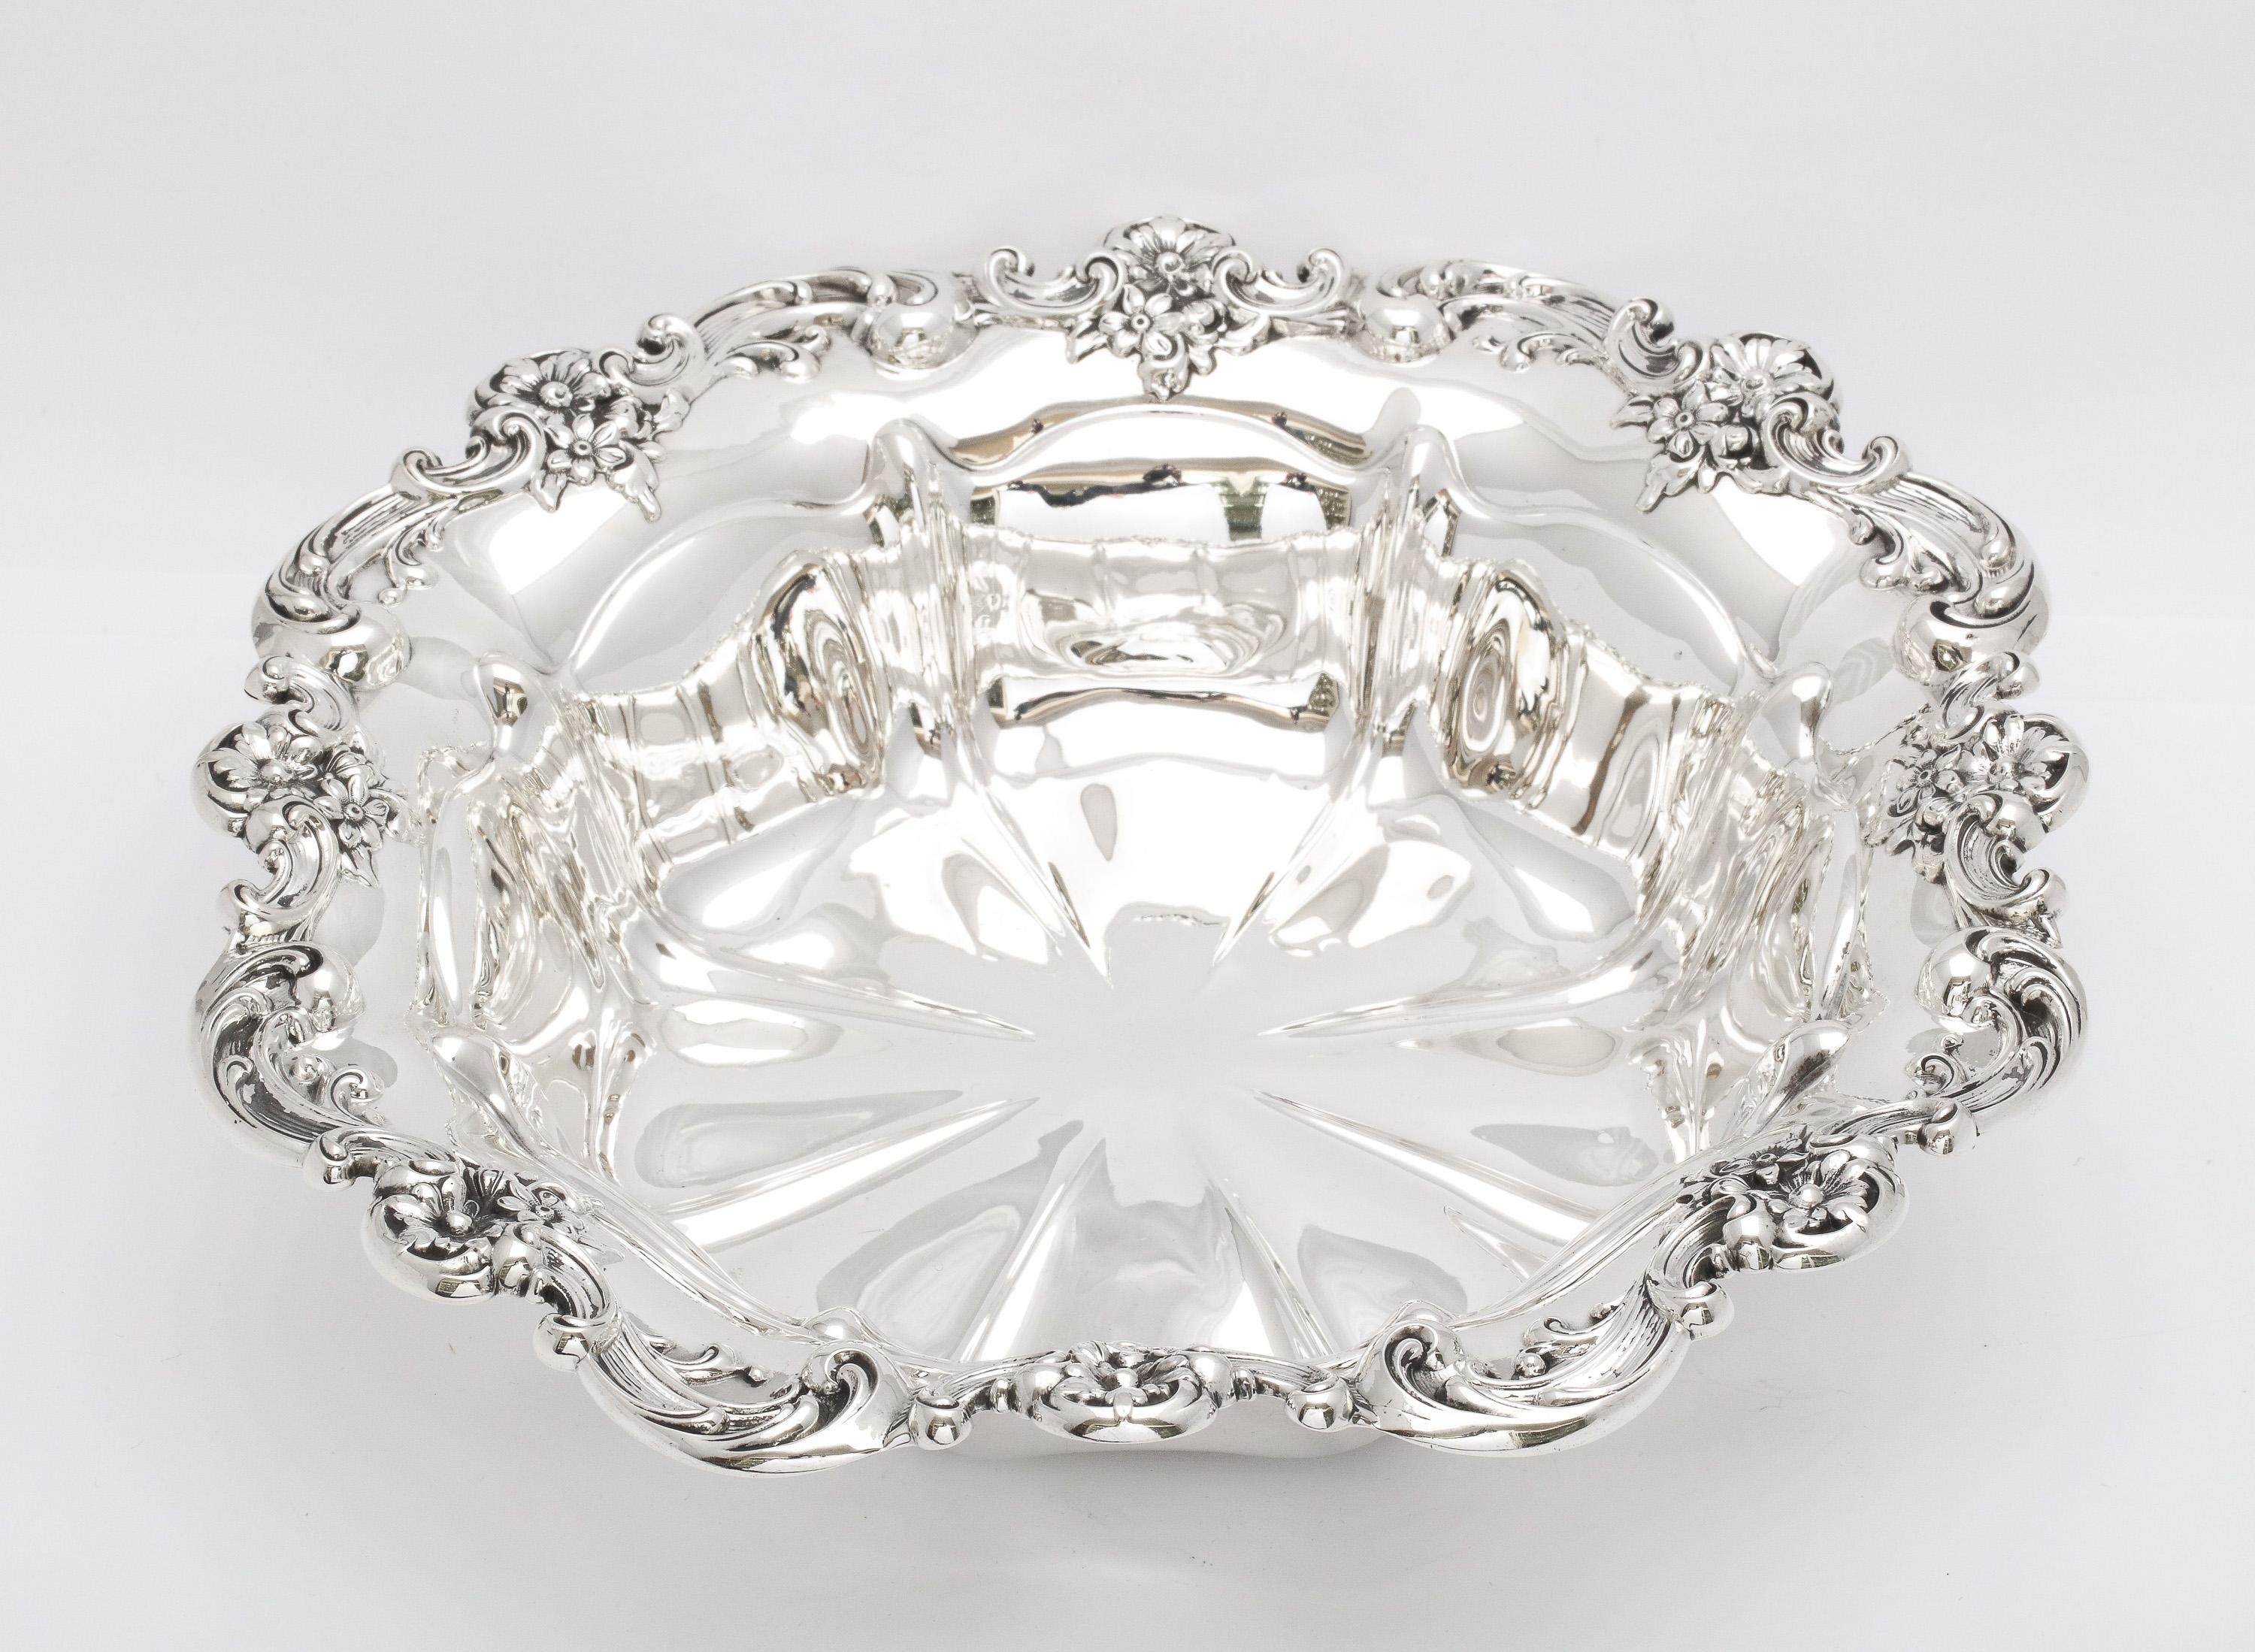 Beautiful Victorian-Style Sterling Silver Centerpiece Bowl By Gorham For Sale 3